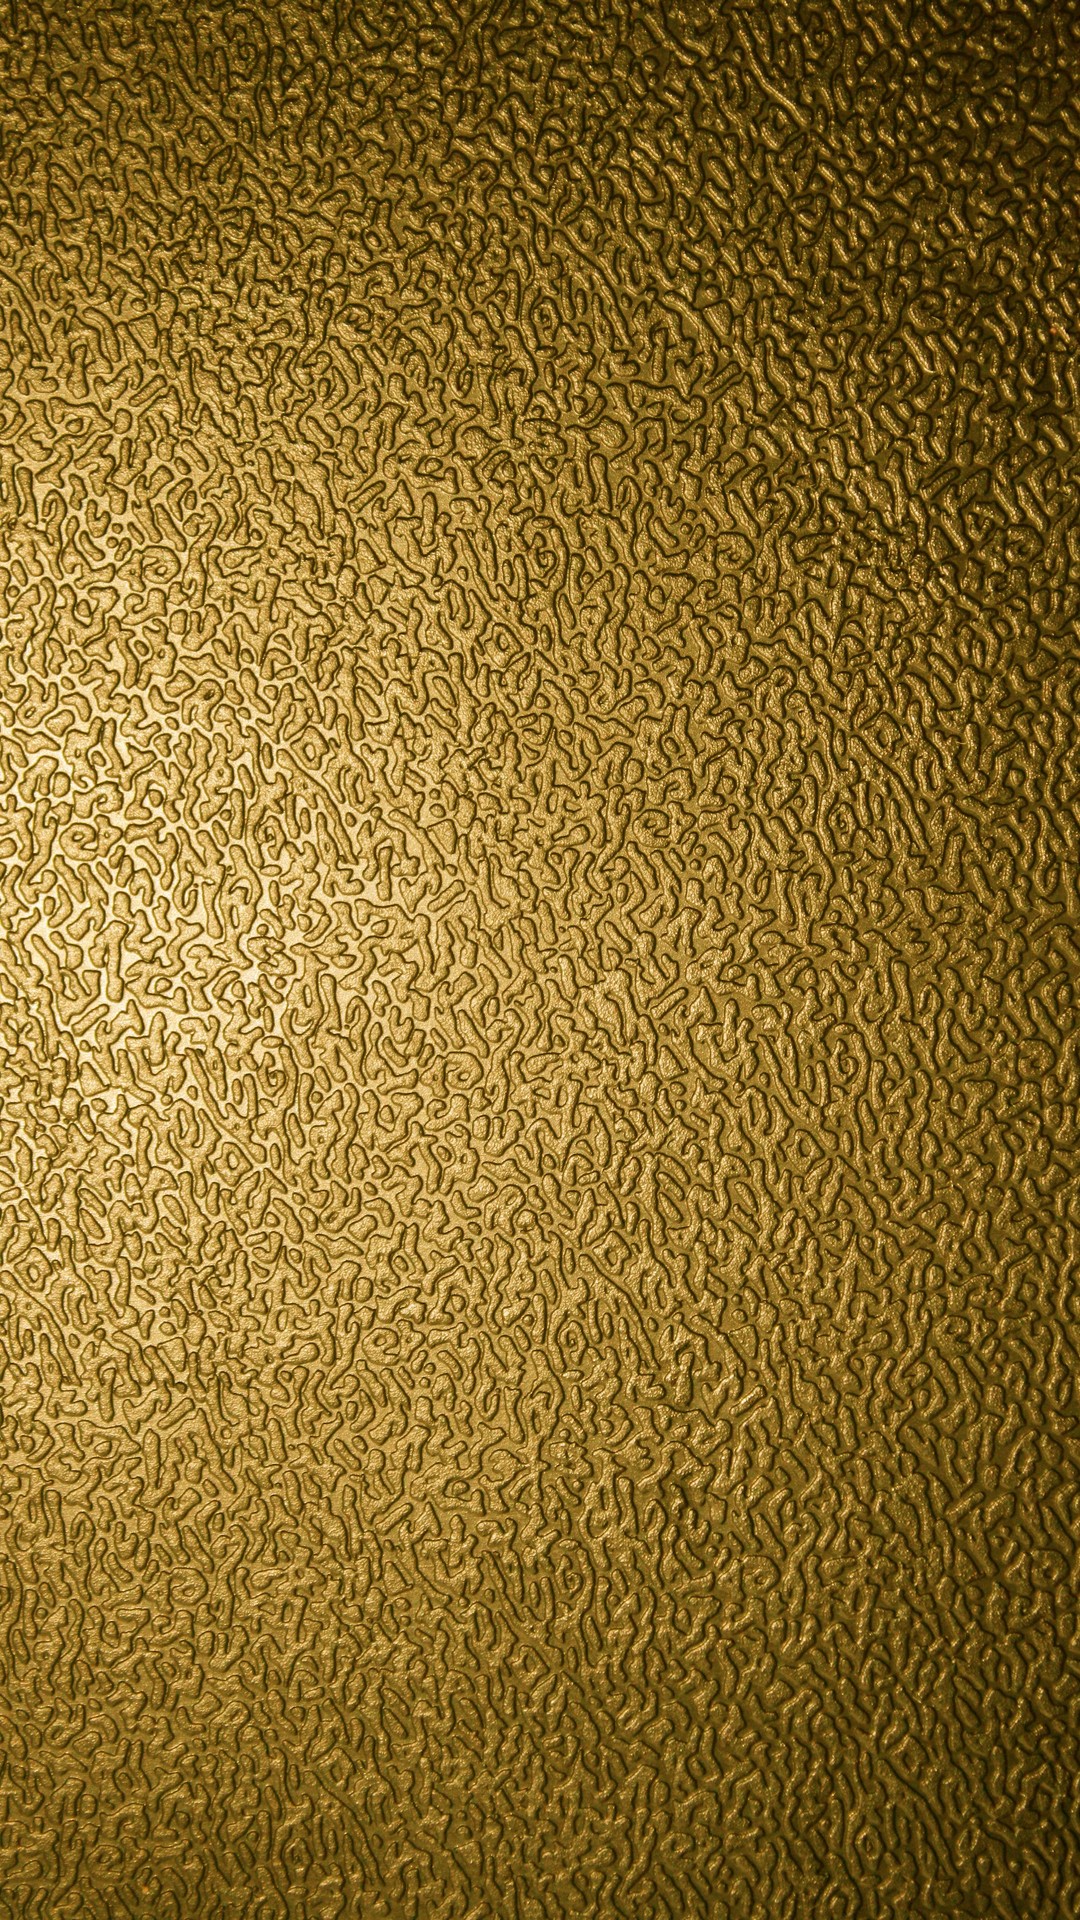 Gold Pattern Android Wallpaper High Resolution 1080X1920